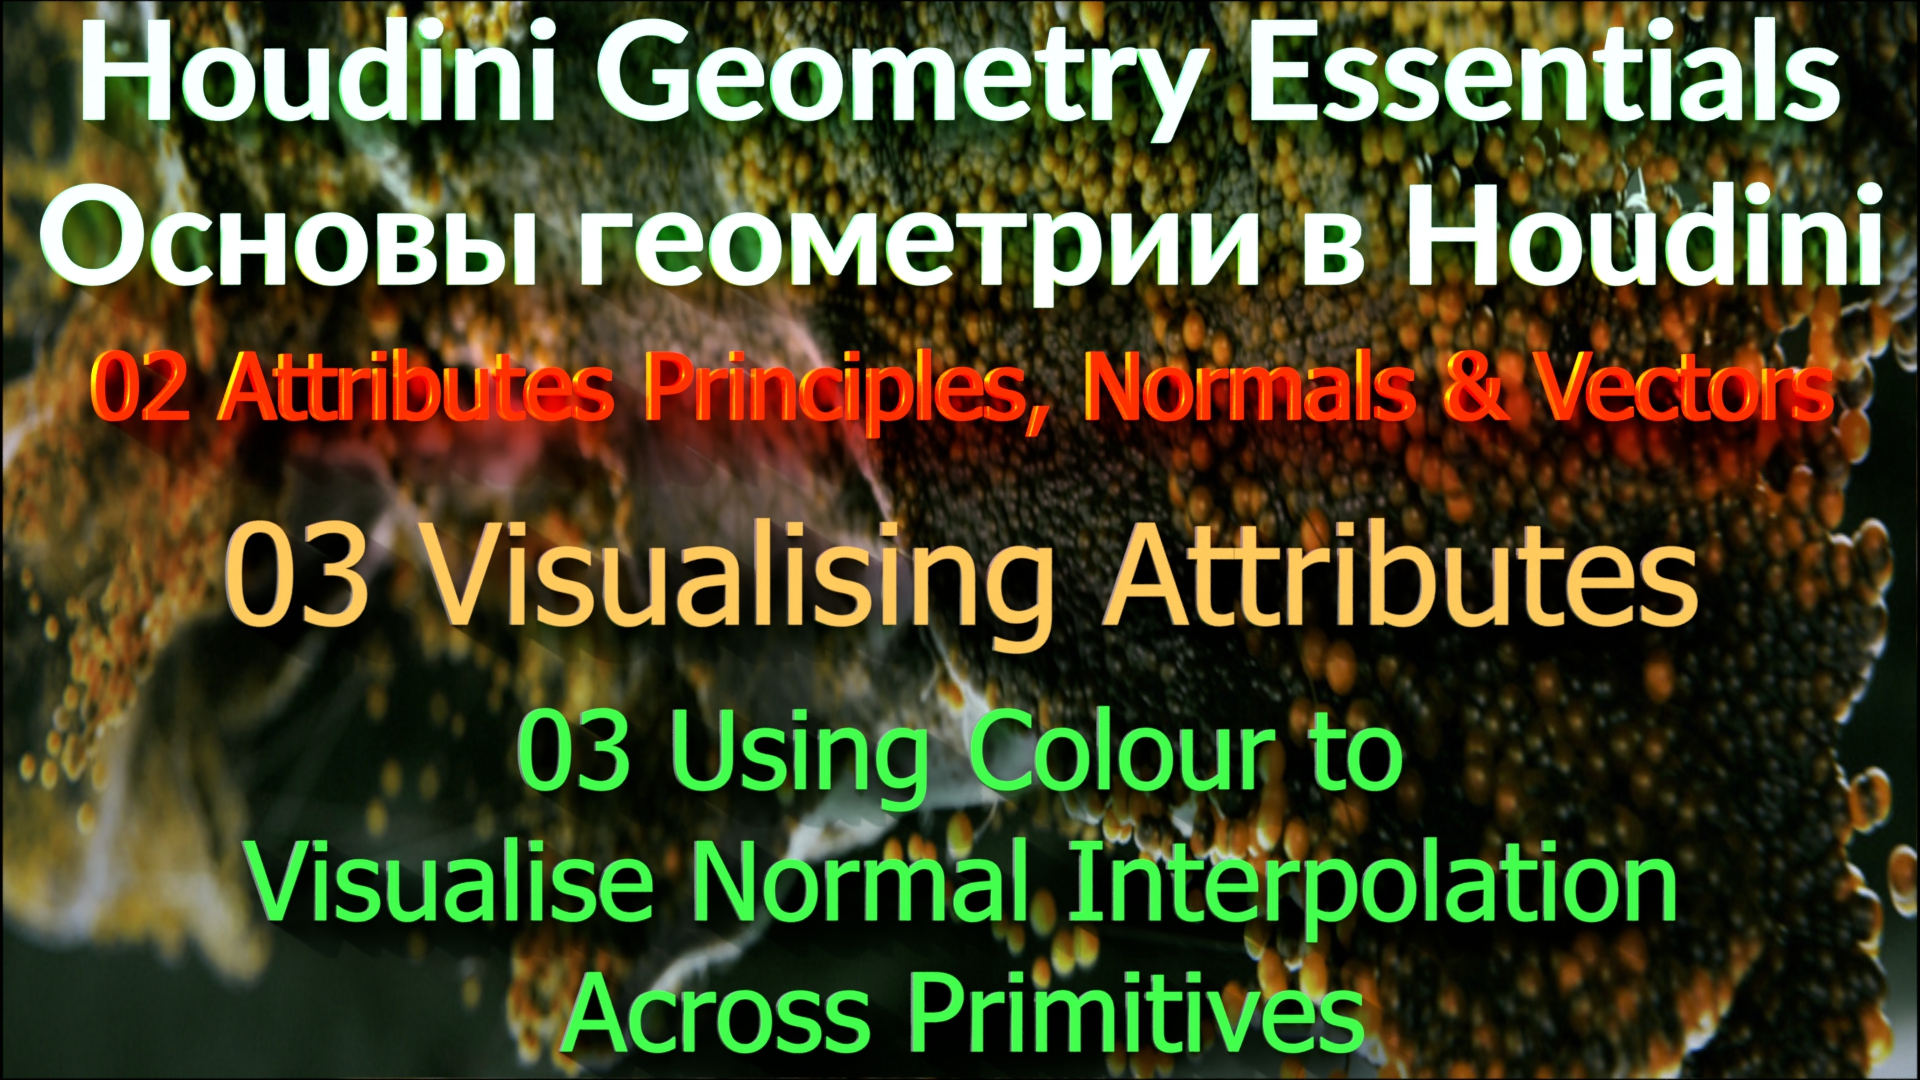 02_03_03 Using Colour to Visualise Normal Interpolation Across Primitives